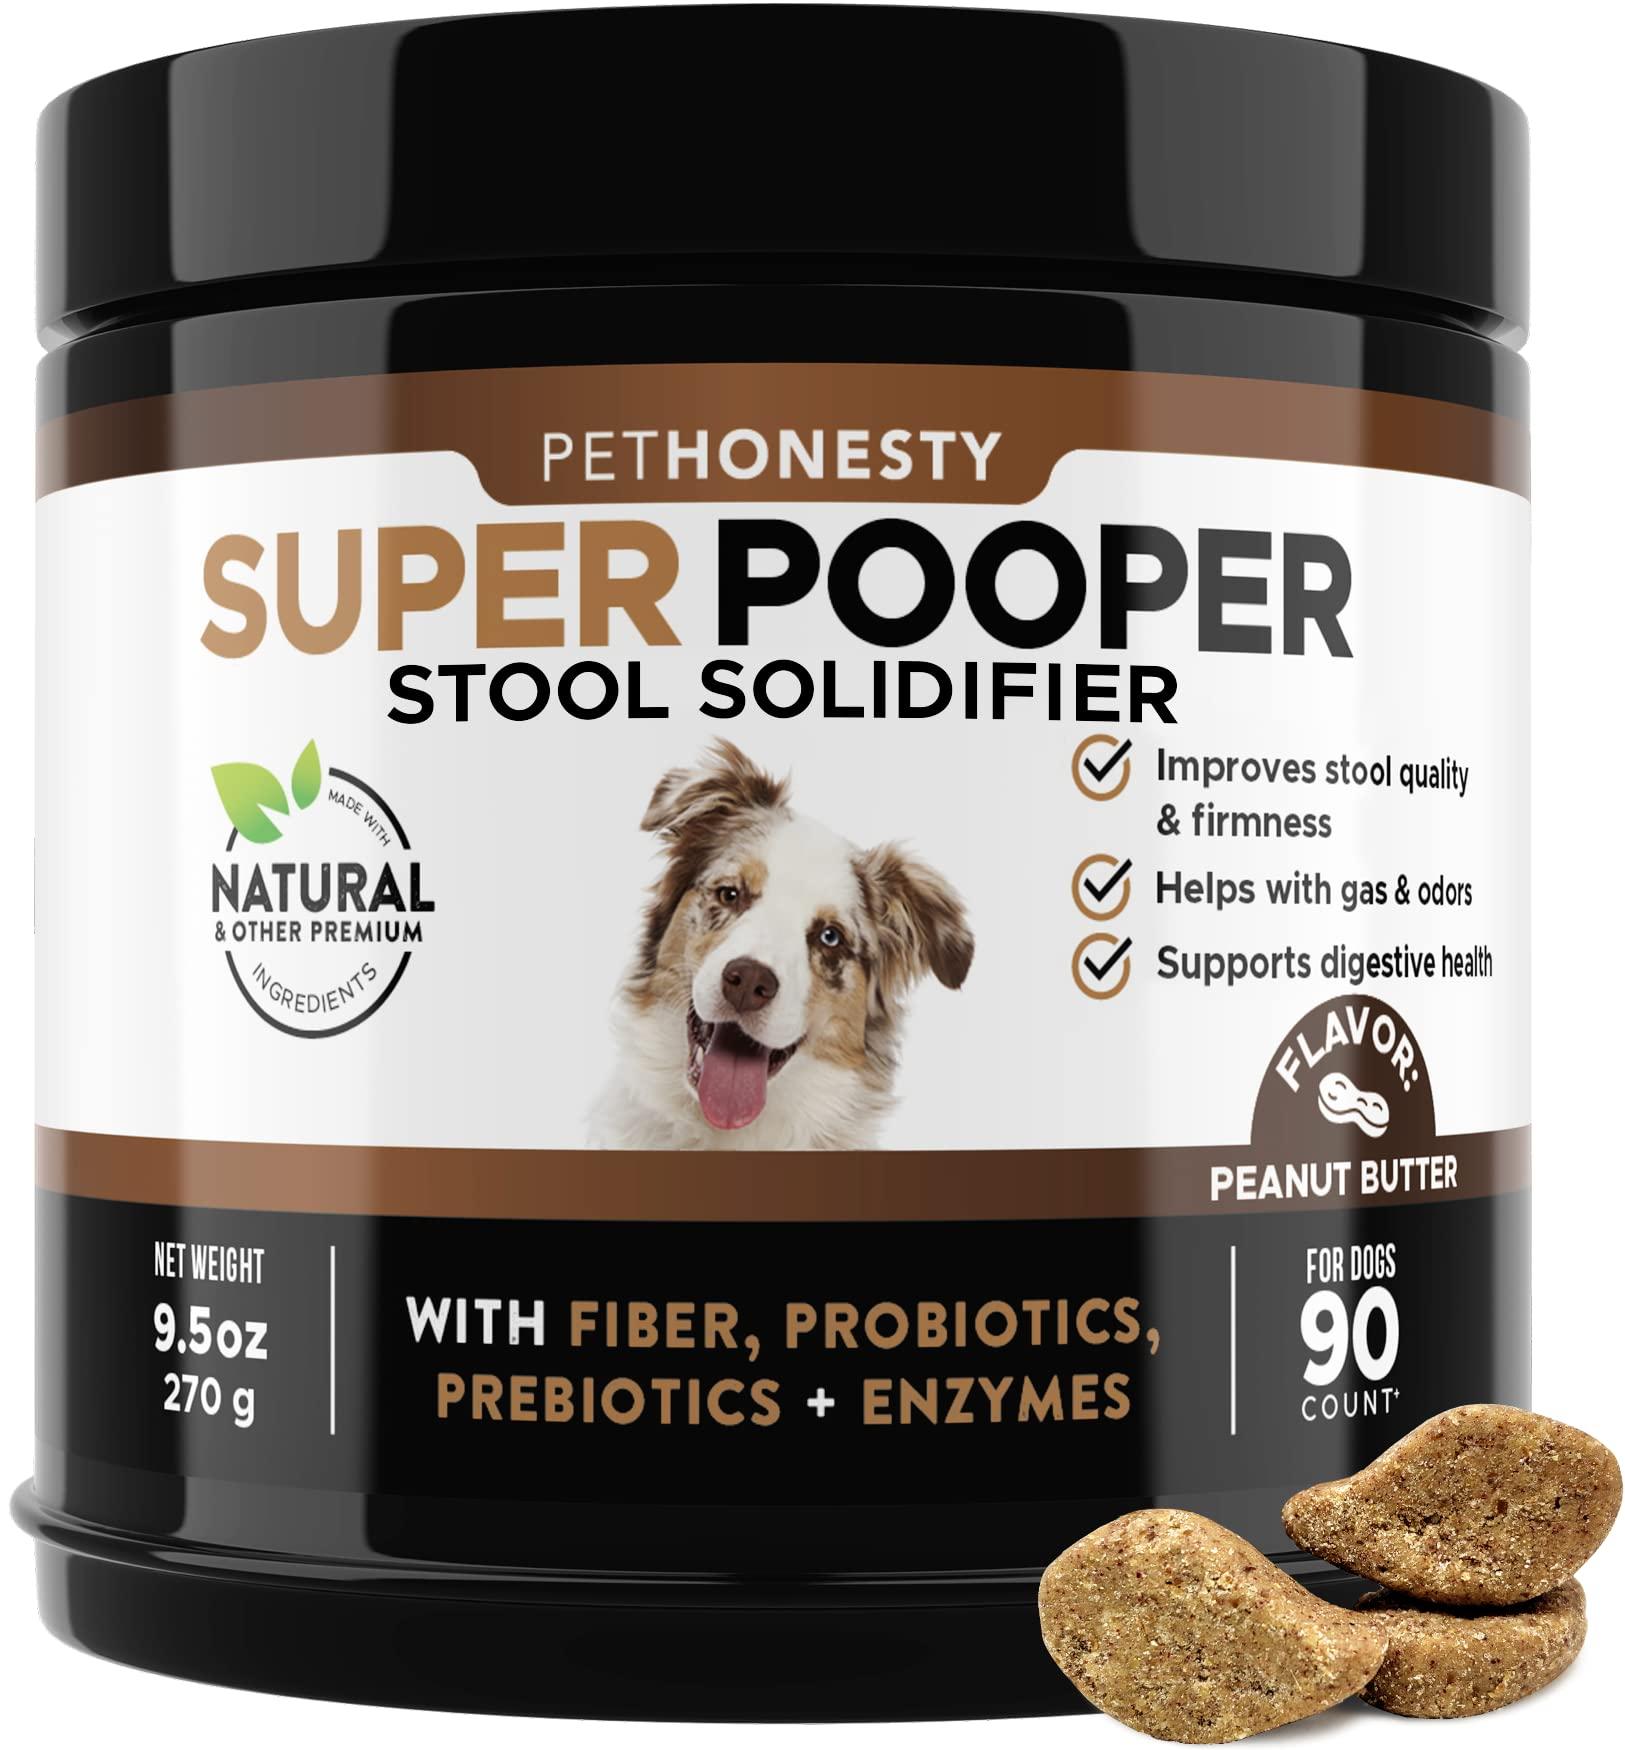 PetHonesty Super Pooper - Digestion & Health Supplement for Dogs - Stool Solidifier, Diarrhea & Bowel Support, Fiber, Probiotics, & Digestive Enzymes (90 Count)